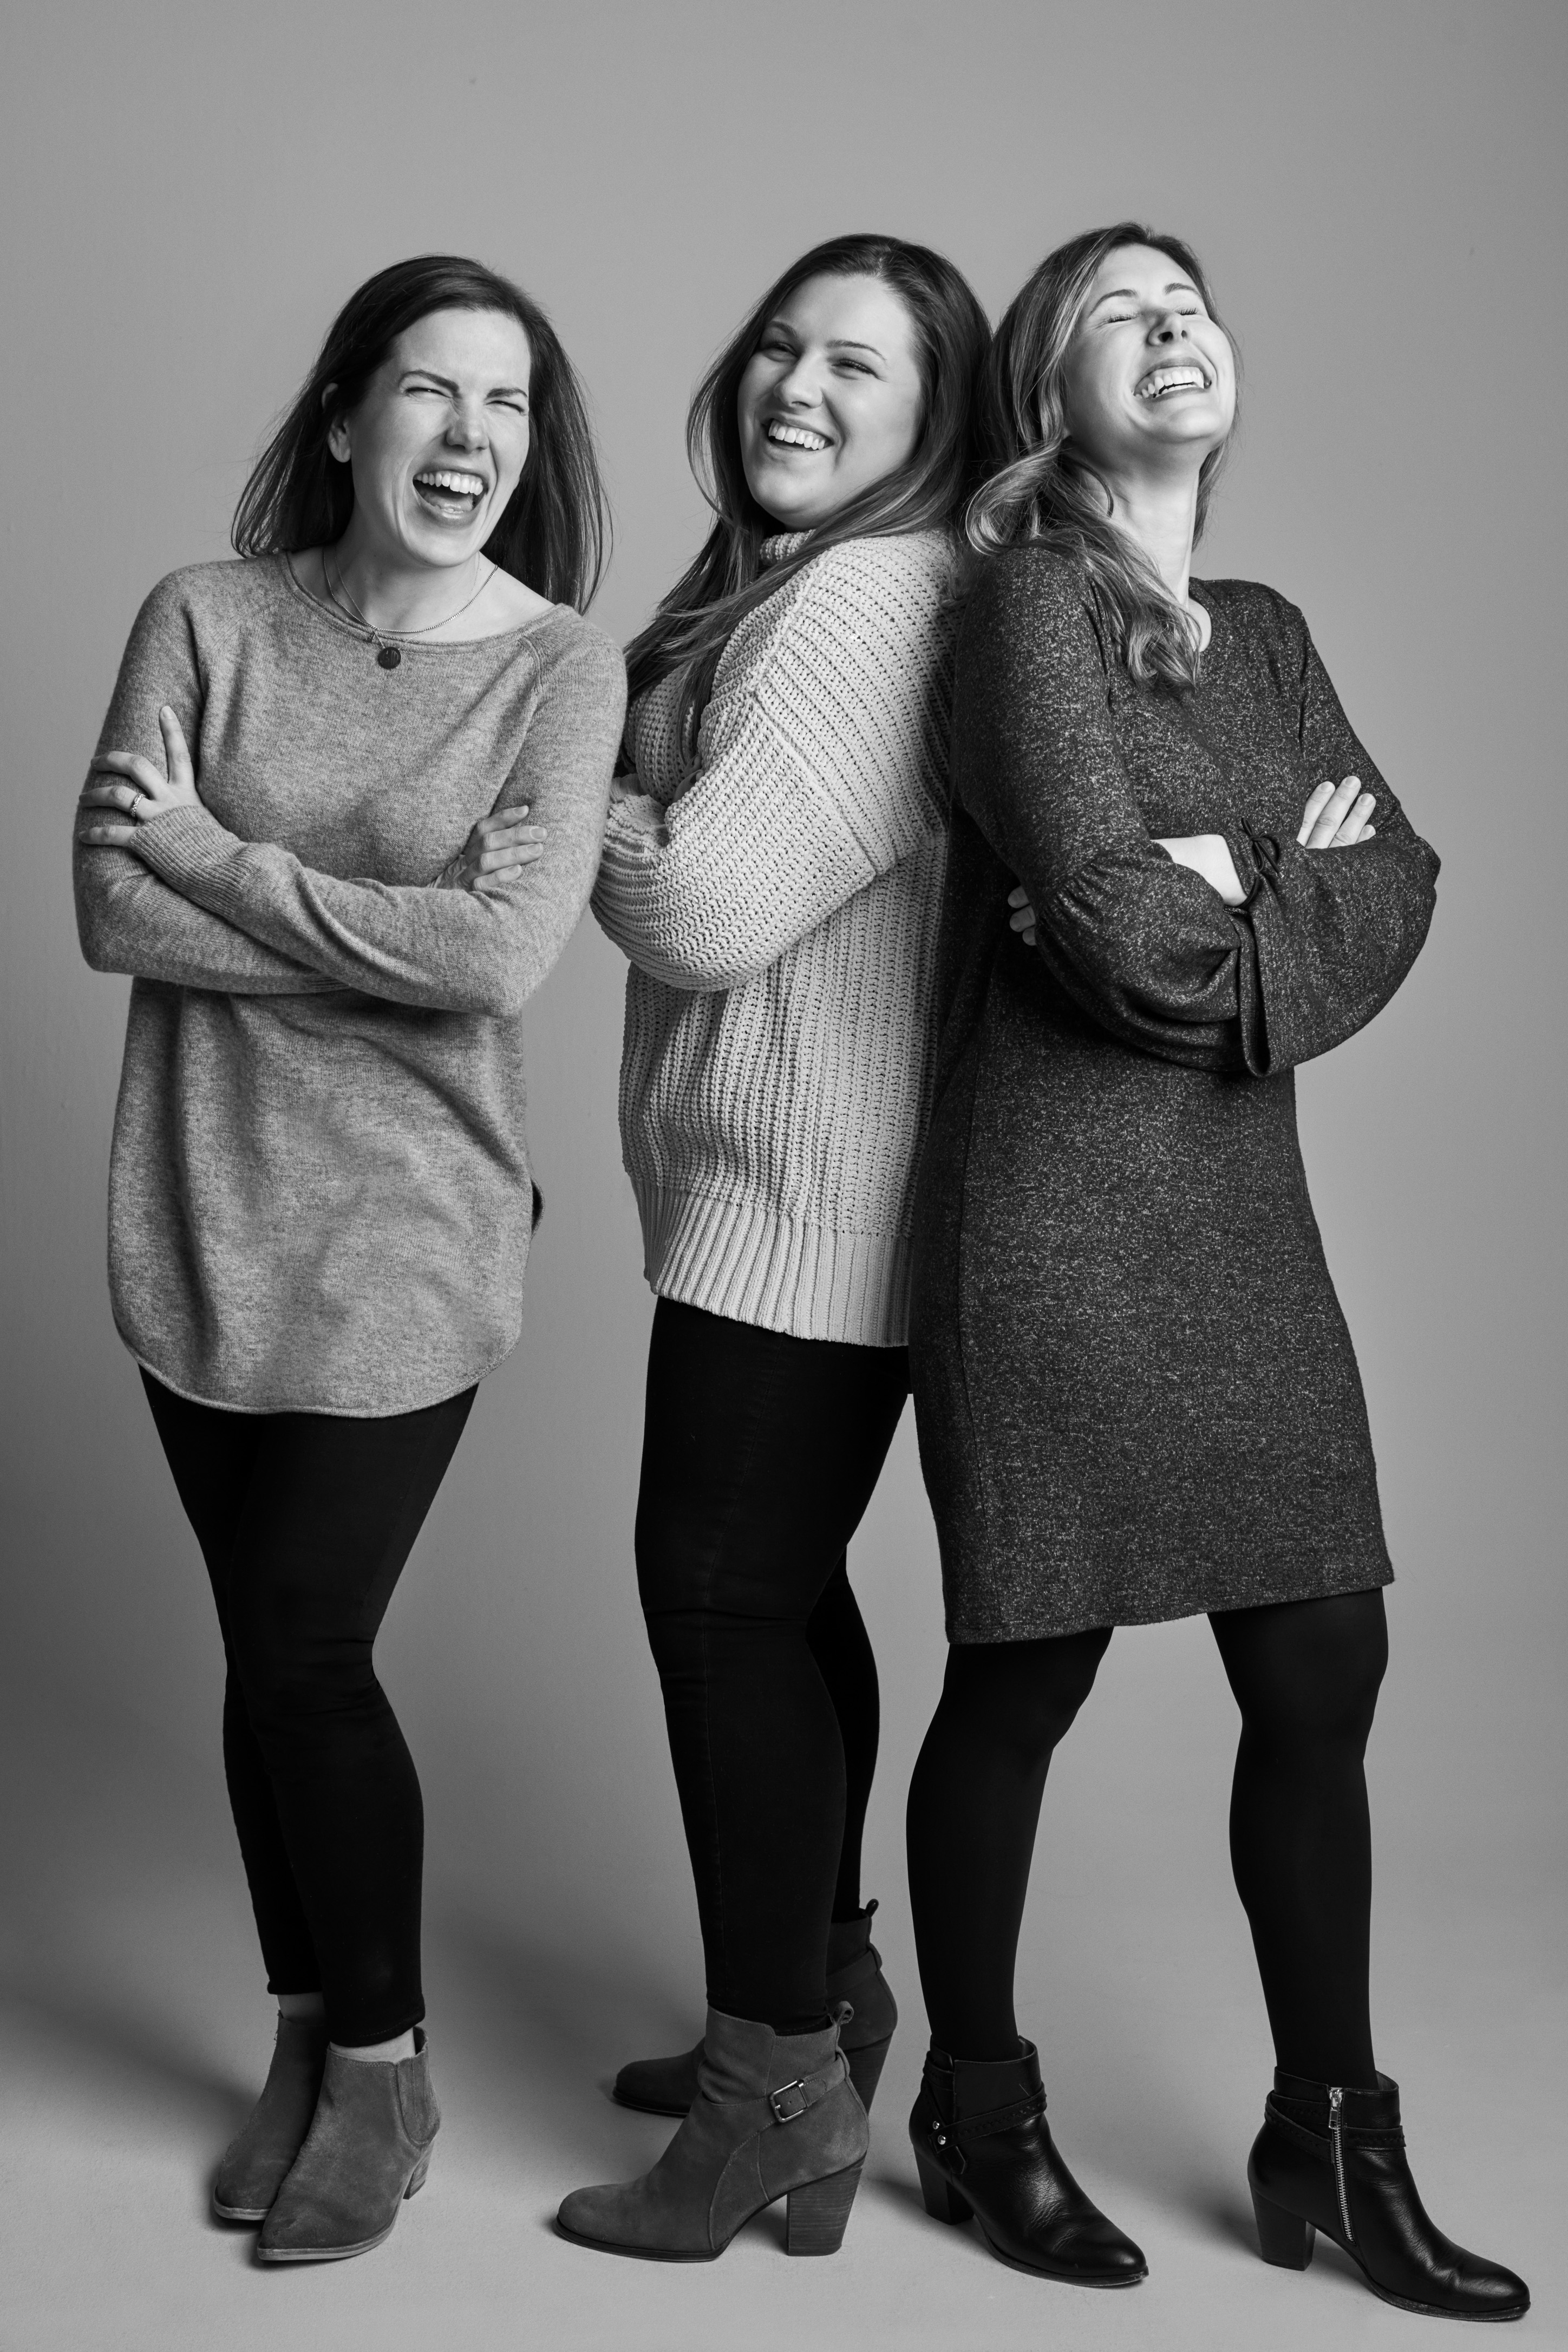 Three women from David's Bridal's PR and Social Media team laughing in a photo studio setting)